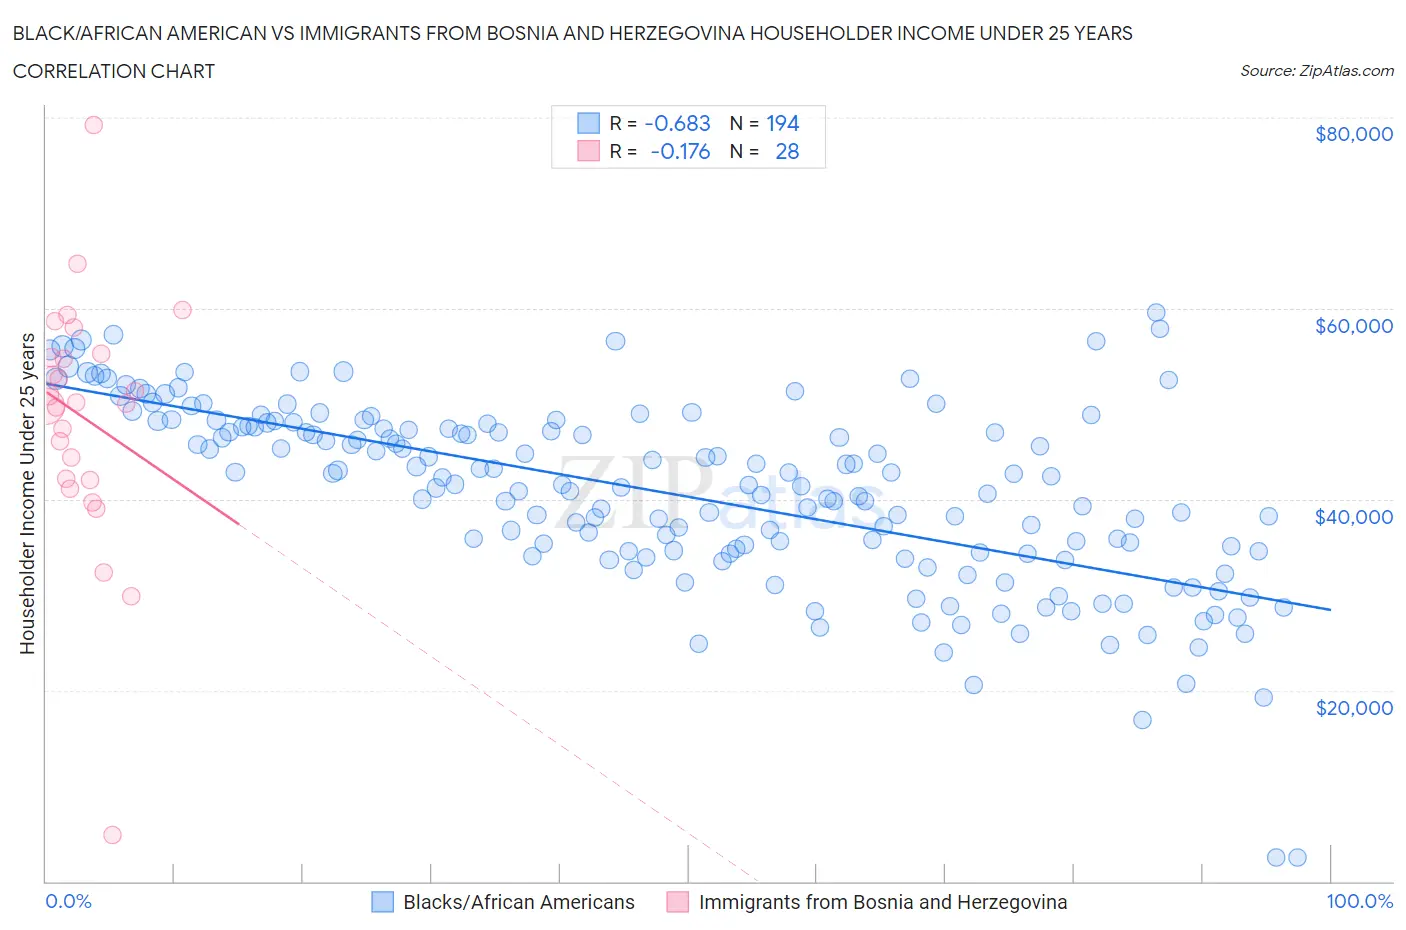 Black/African American vs Immigrants from Bosnia and Herzegovina Householder Income Under 25 years